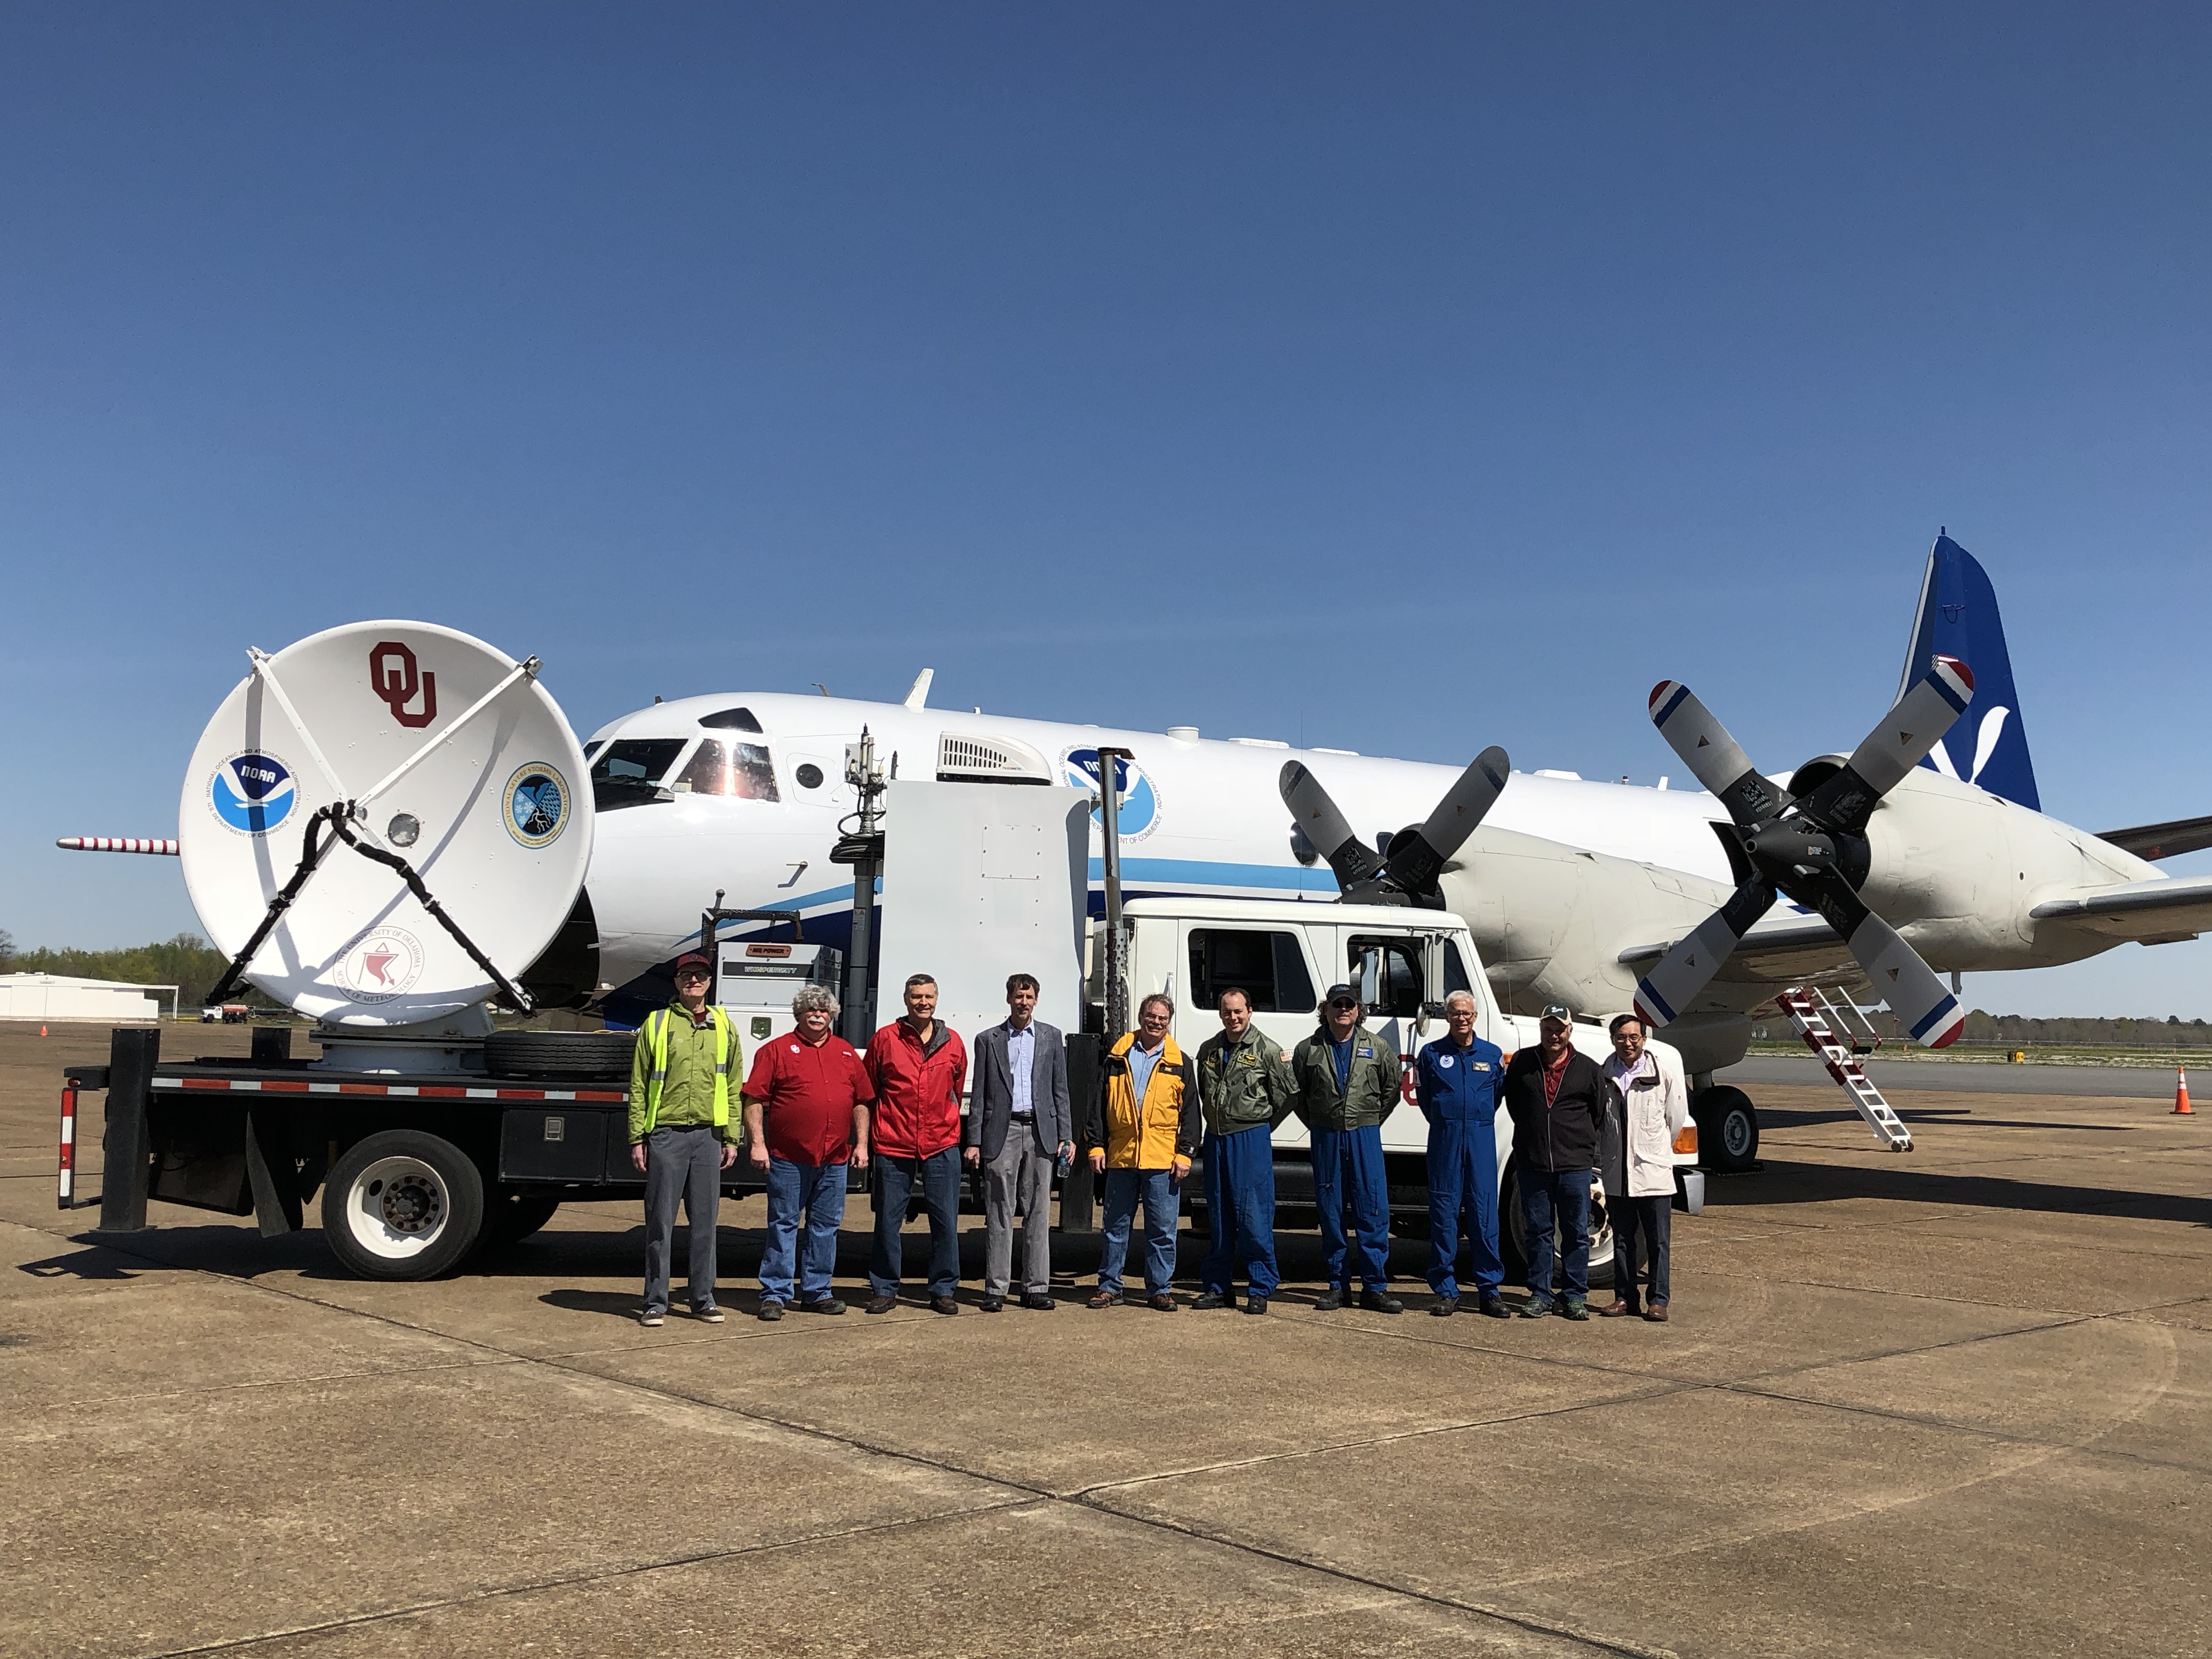 Researchers in front of a OU CIMMS mobile radar unit and the NOAAP-3 airplane used in VORTEX-Southeast.